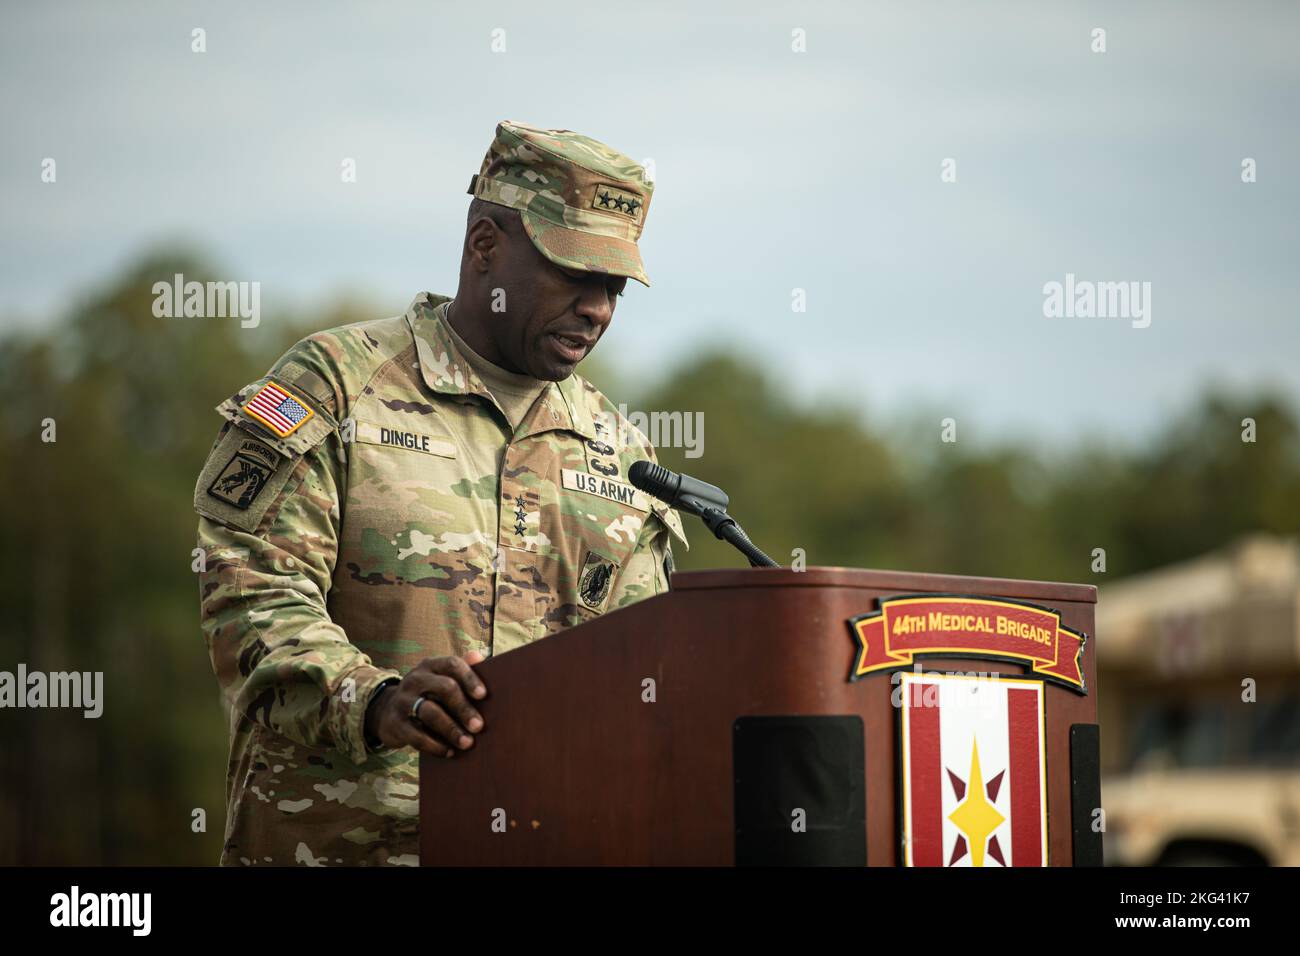 Us Army Lt Gen R Scott Dingle The 45th Surgeon General Of The United States Army And The